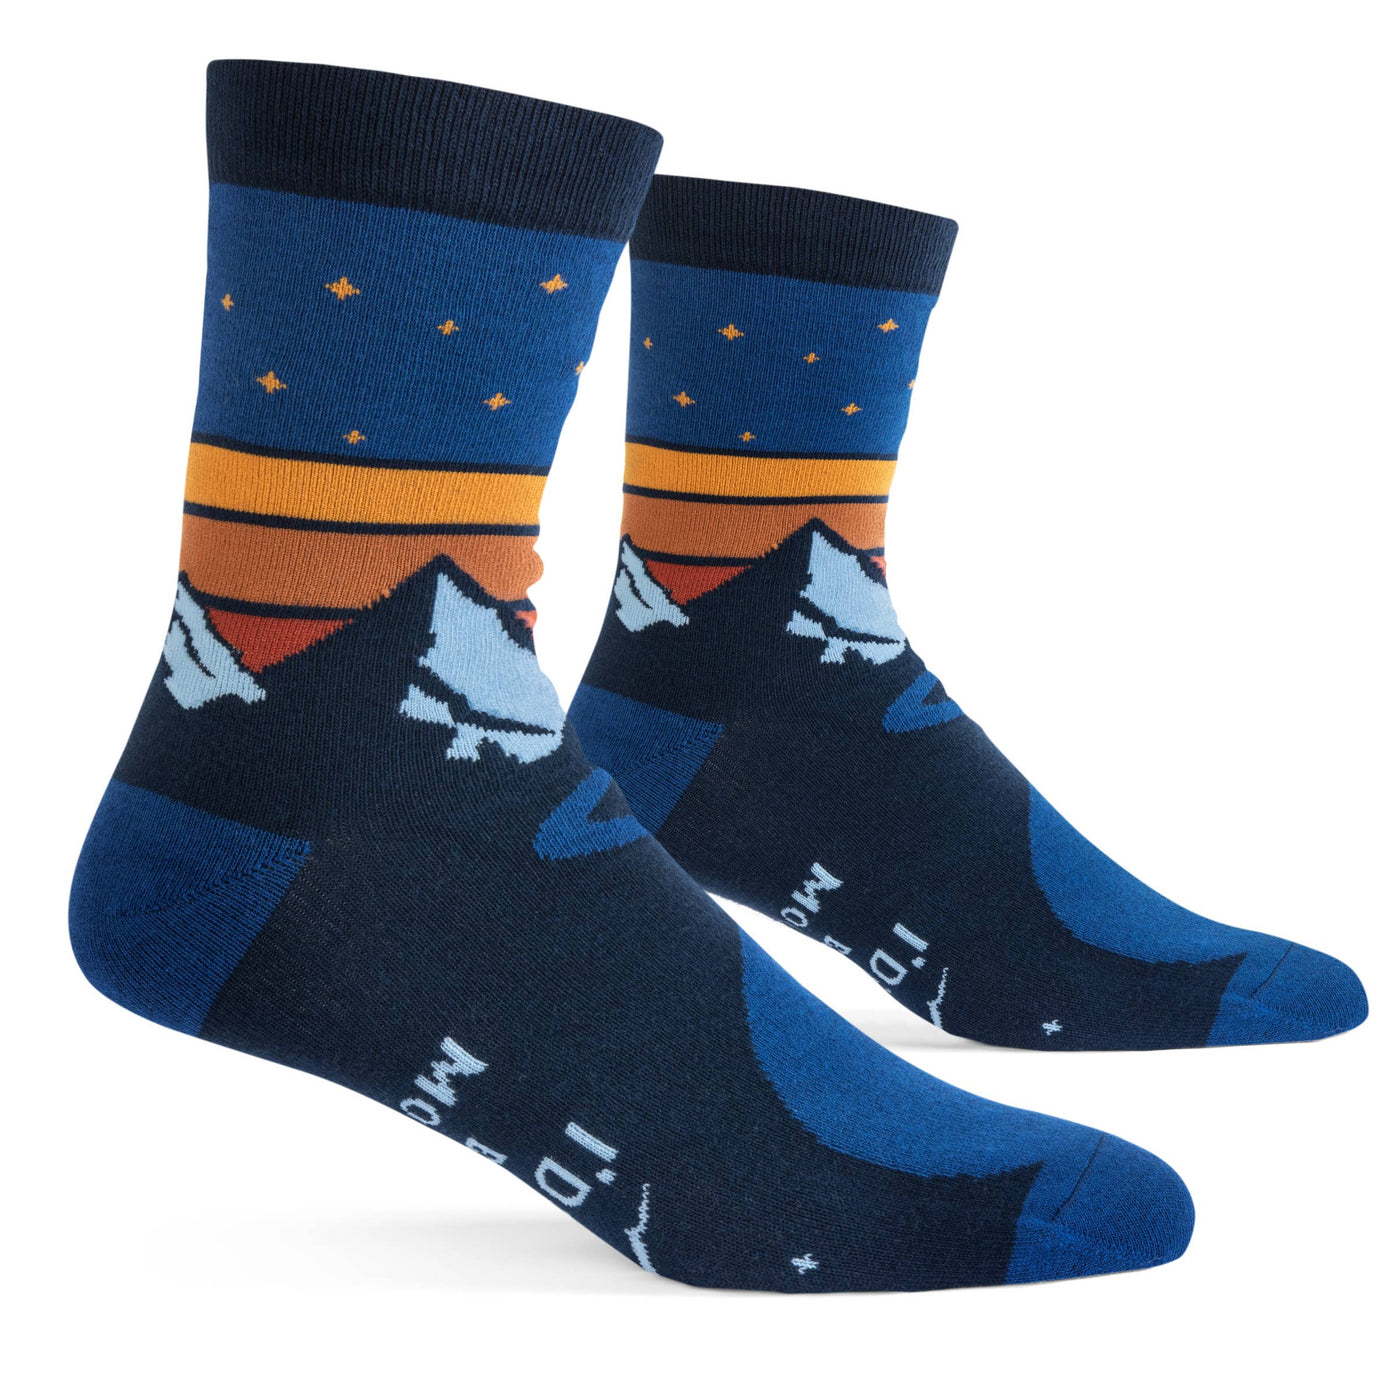 I'd Rather Be In The Mountains Socks